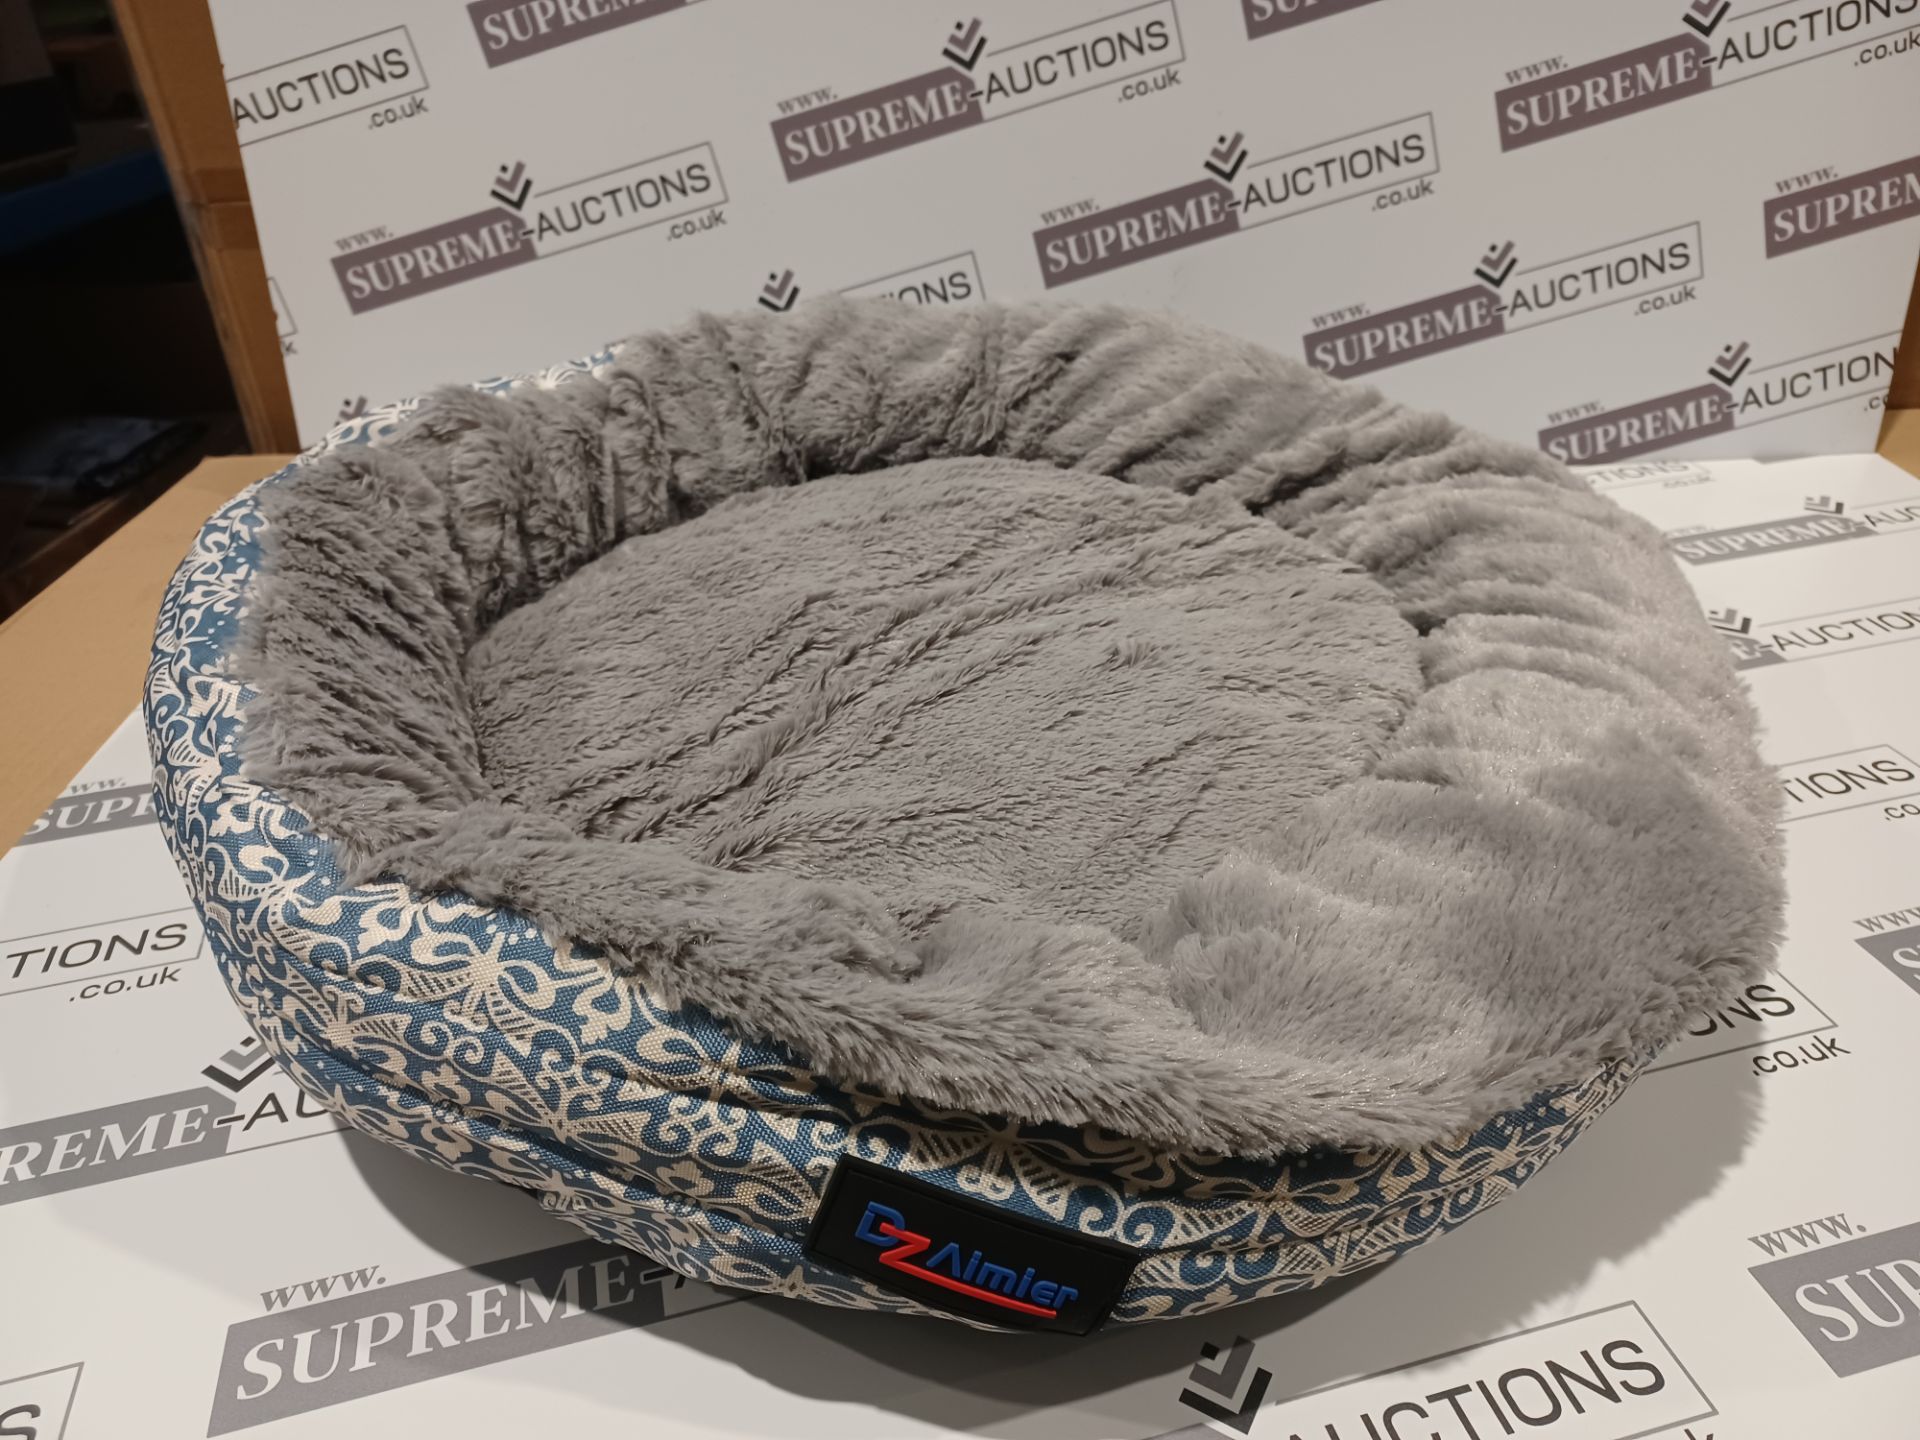 5 X BRAND NEW BLUE AND GREY ROUND LUXURY COMFORT PET BEDS S1RA